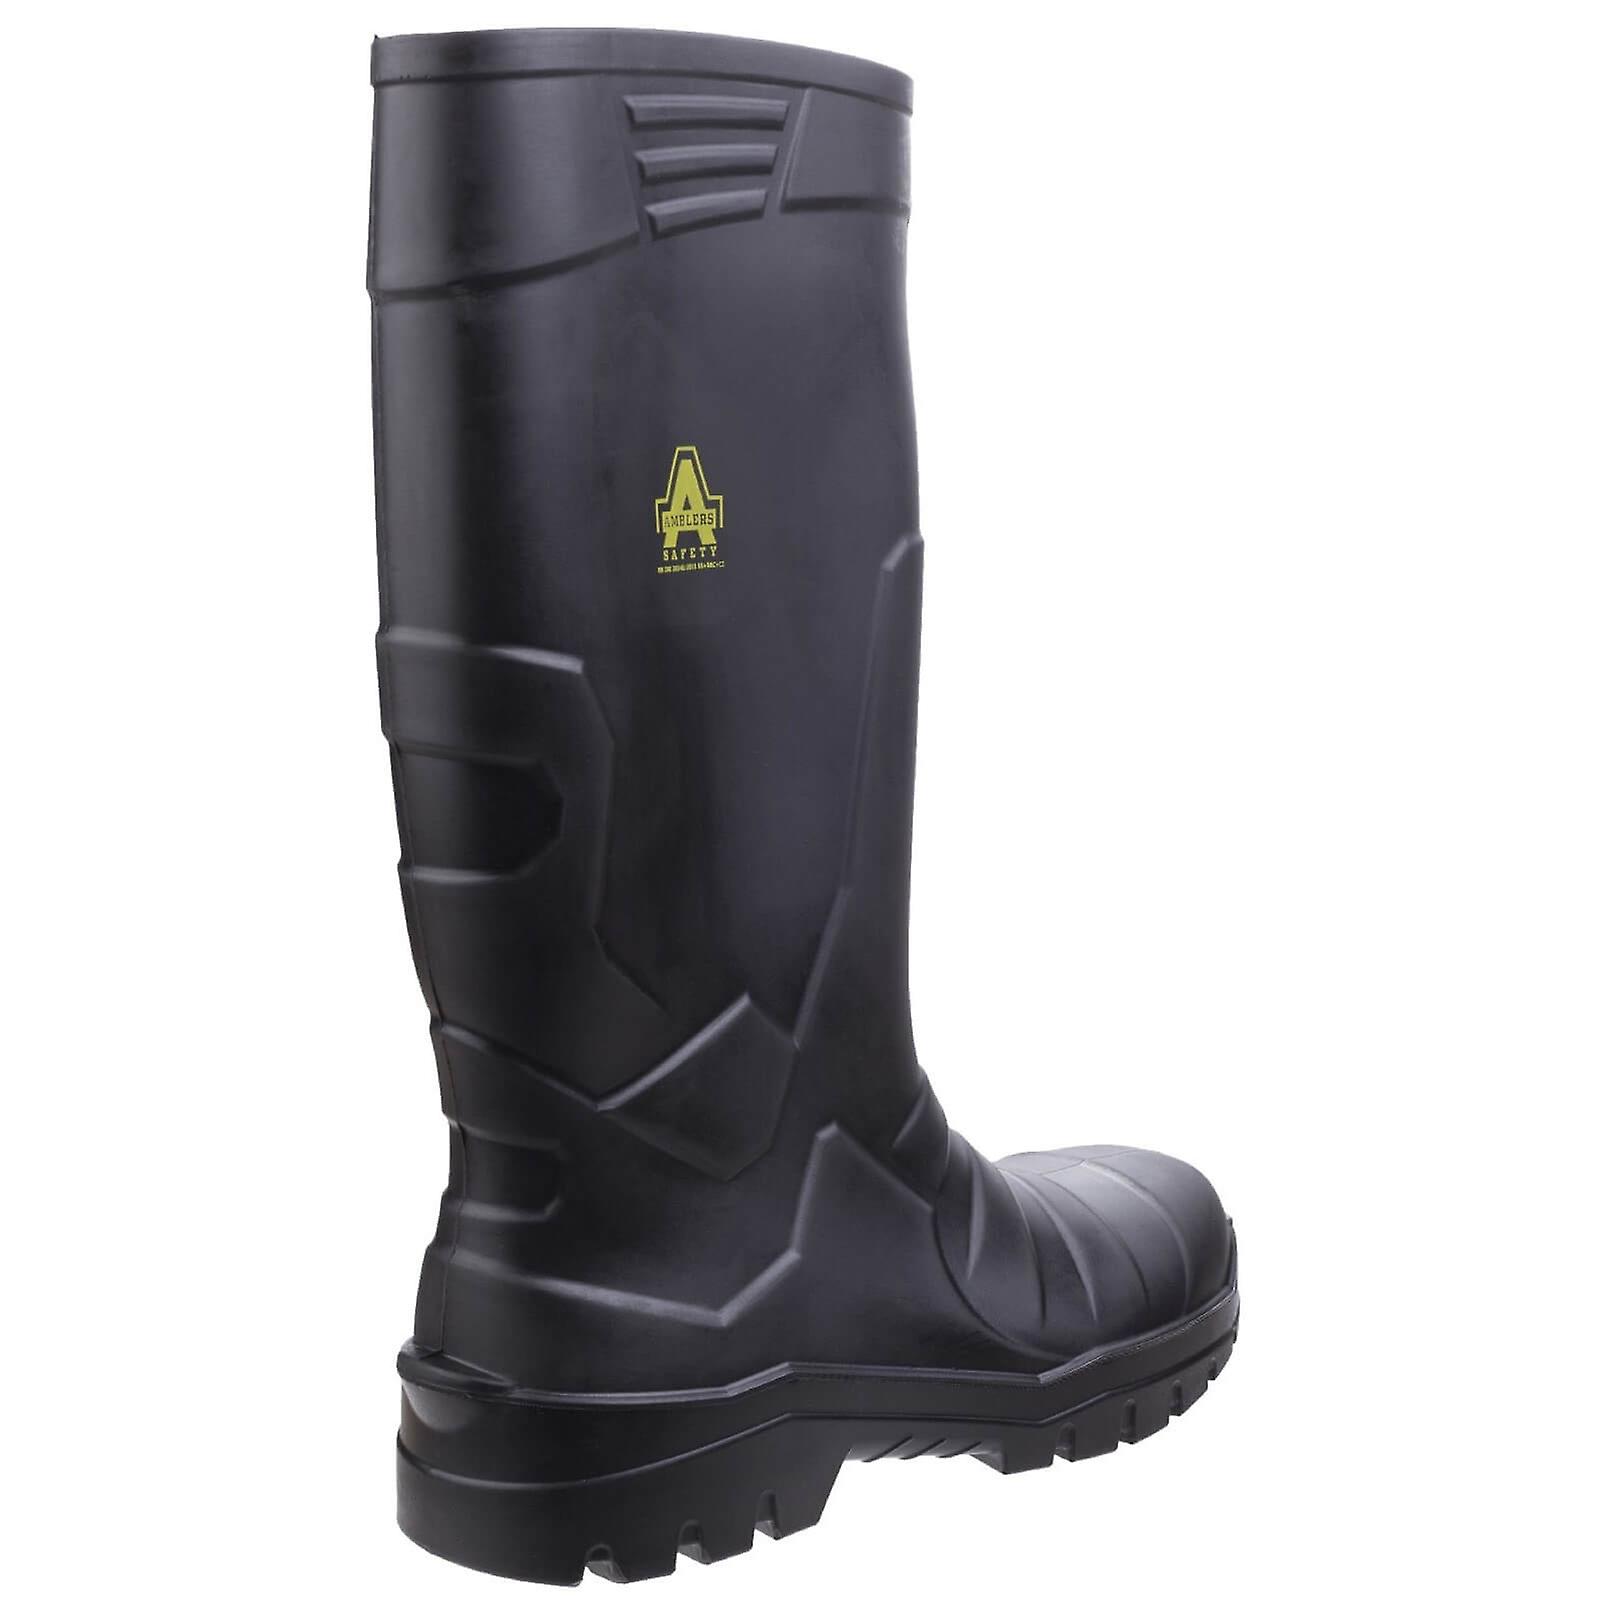 Amblers as1006 full safety wellington boots